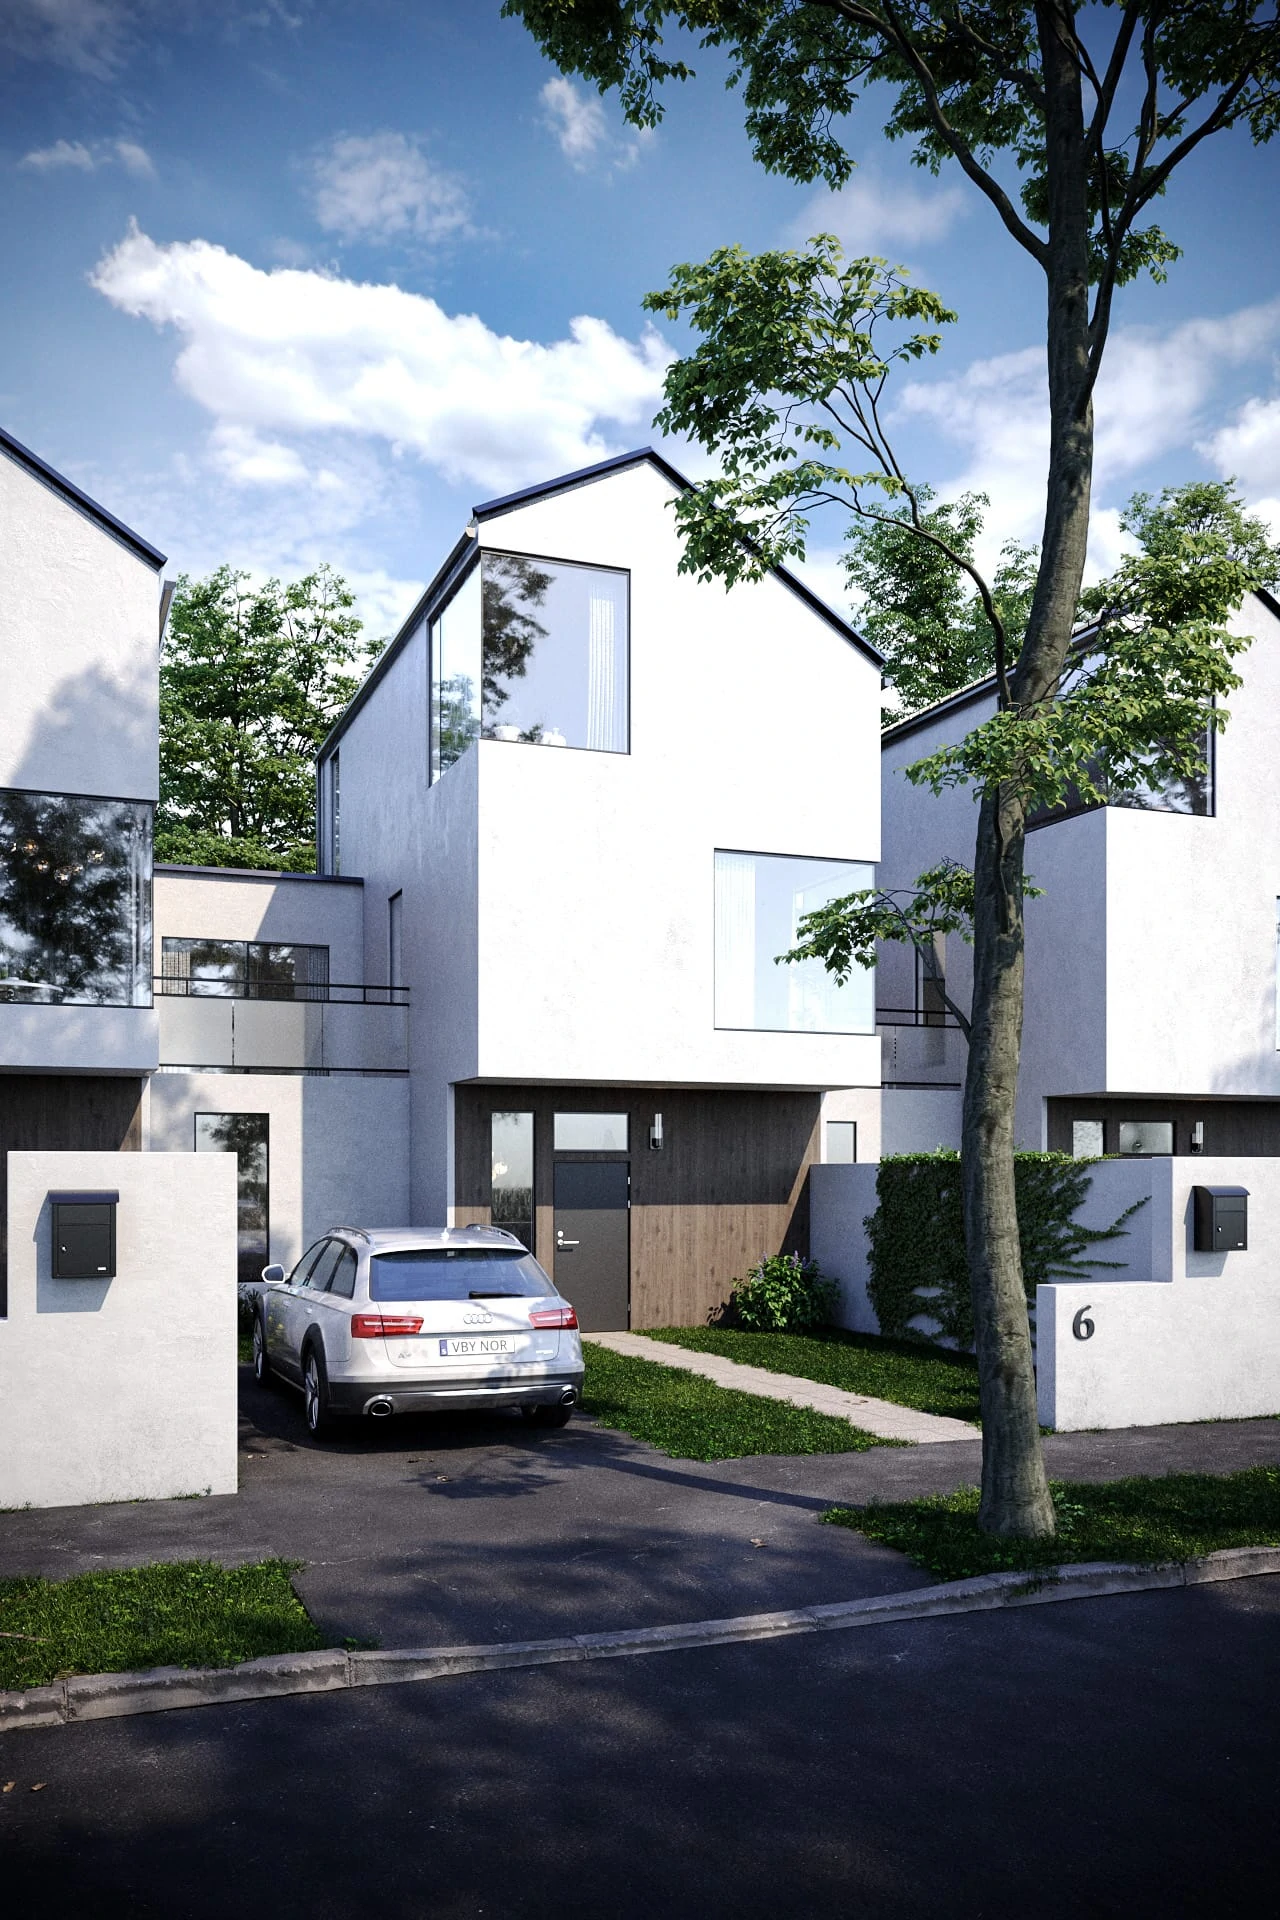 Real estate rendering of a modern townhouse